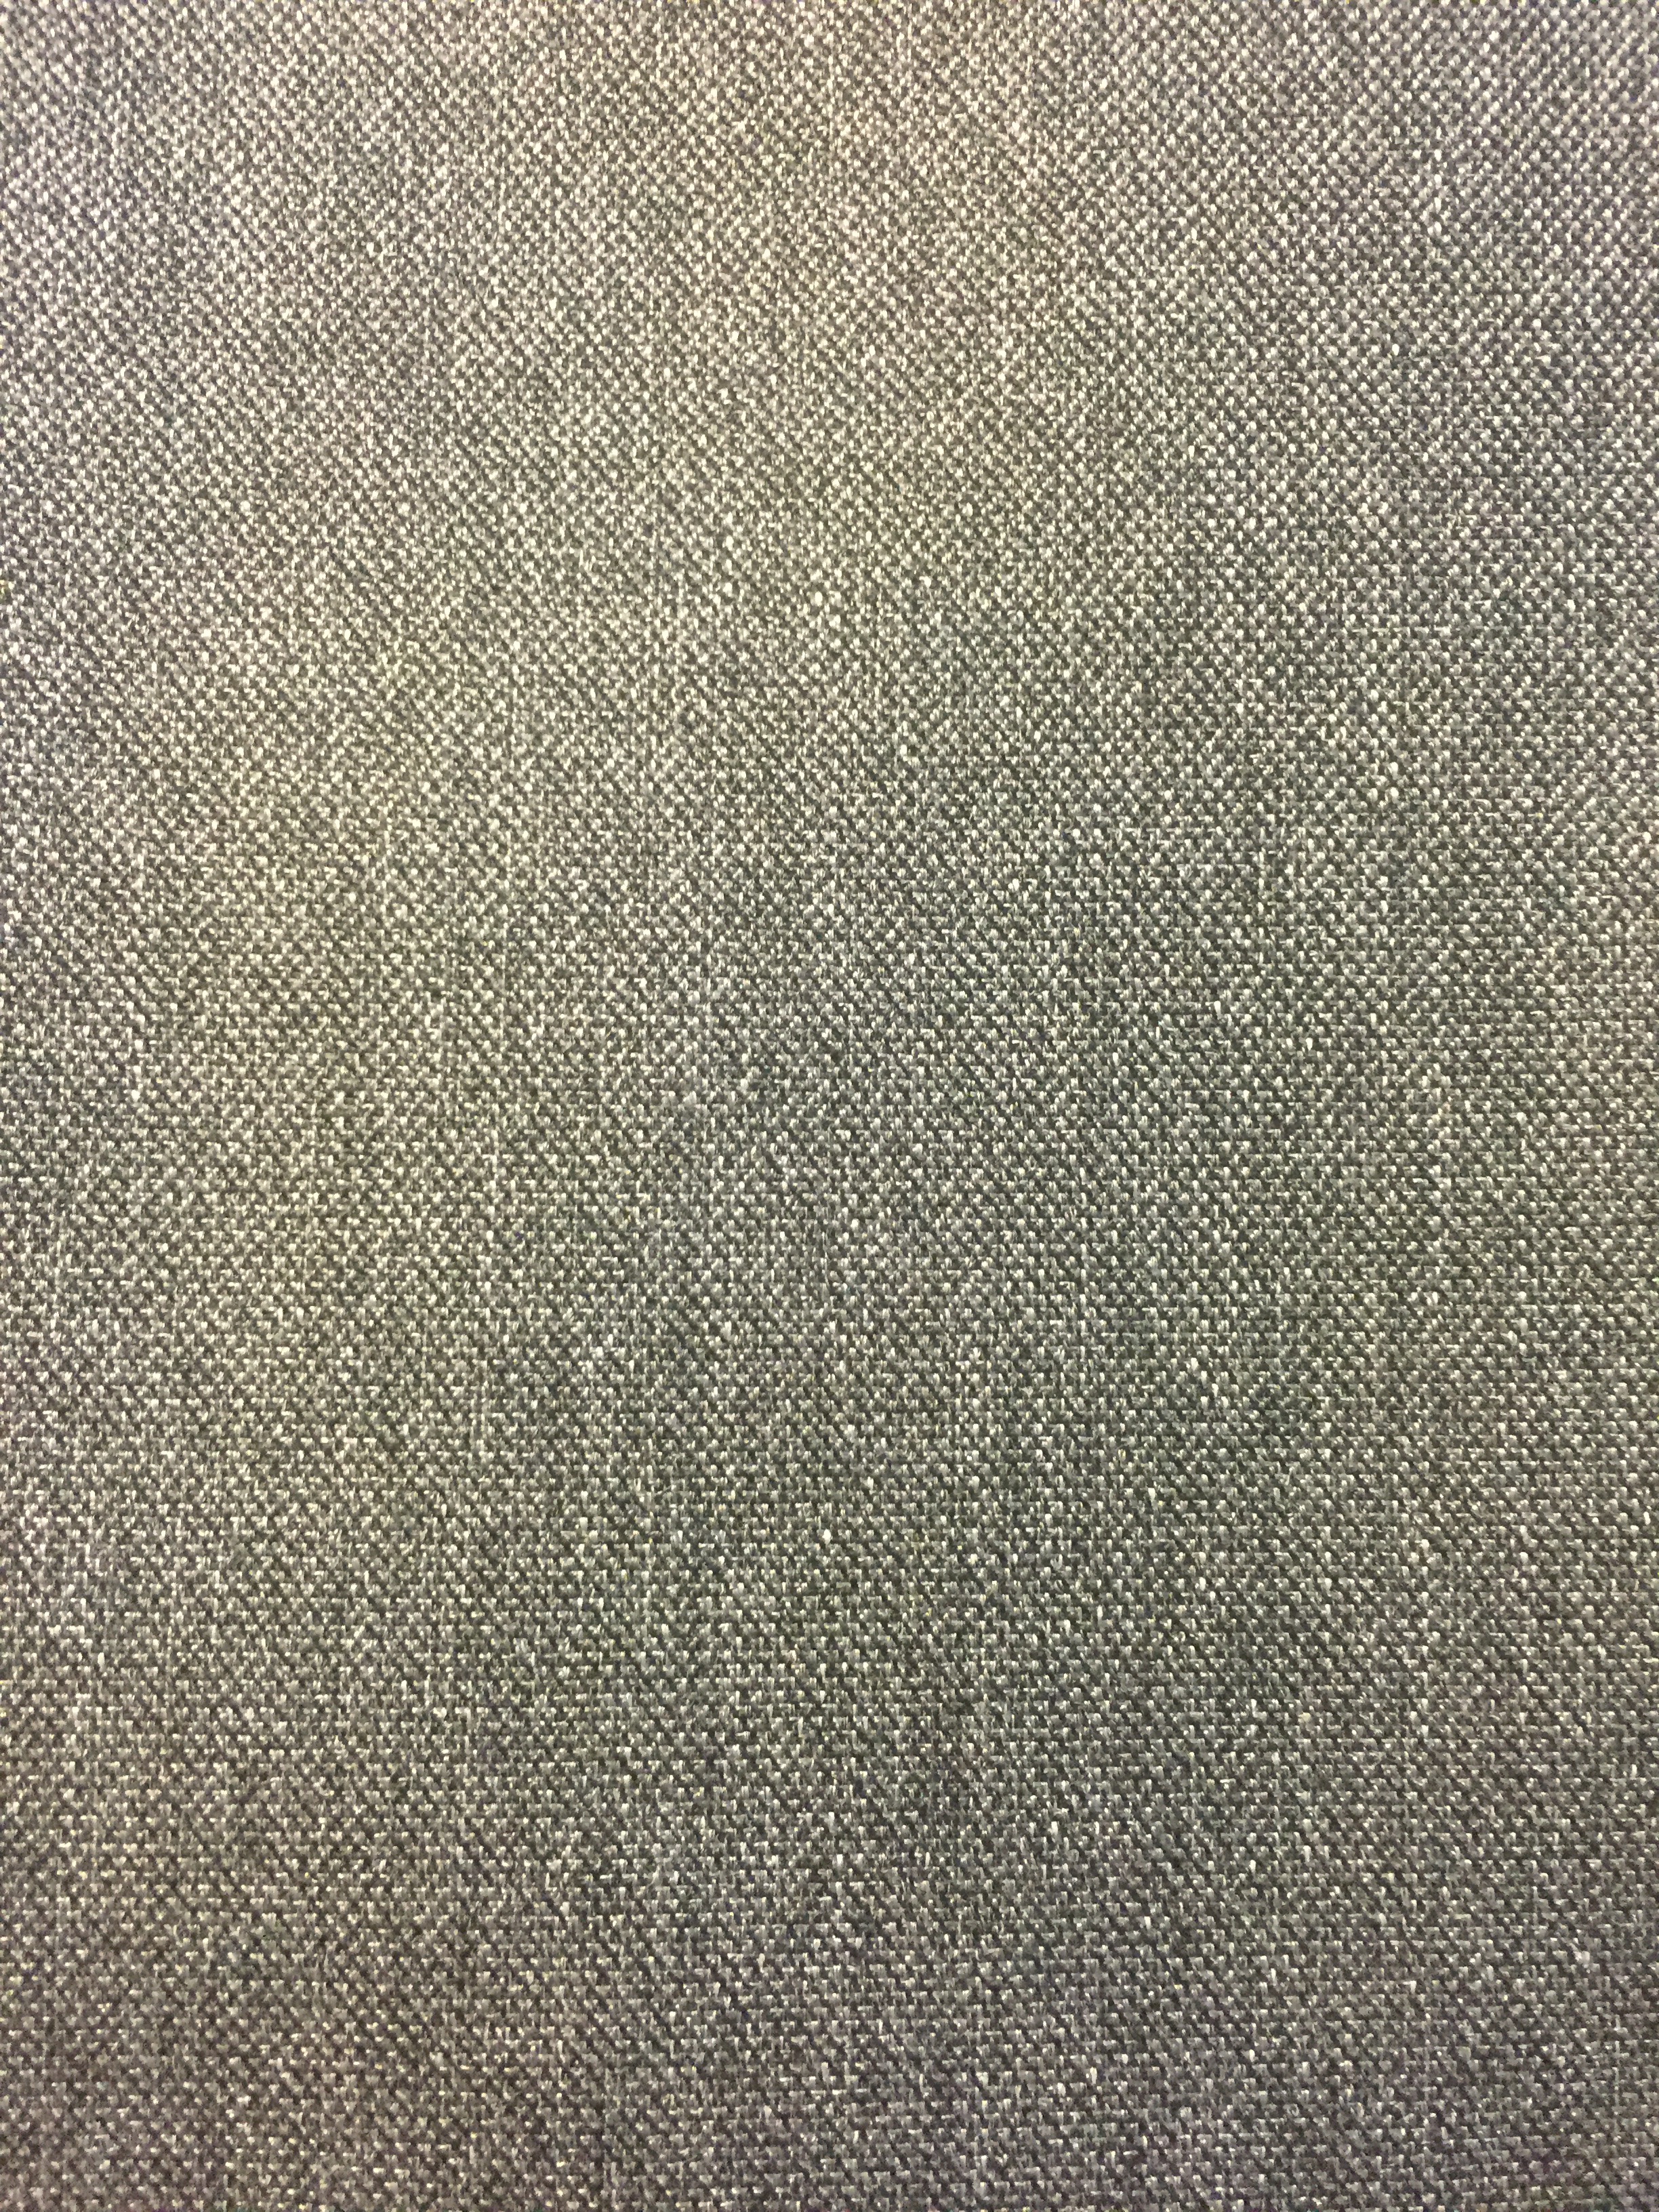 White Jersey Knitted Fabric, GSM: 100-150 at Rs 370/kilogram in